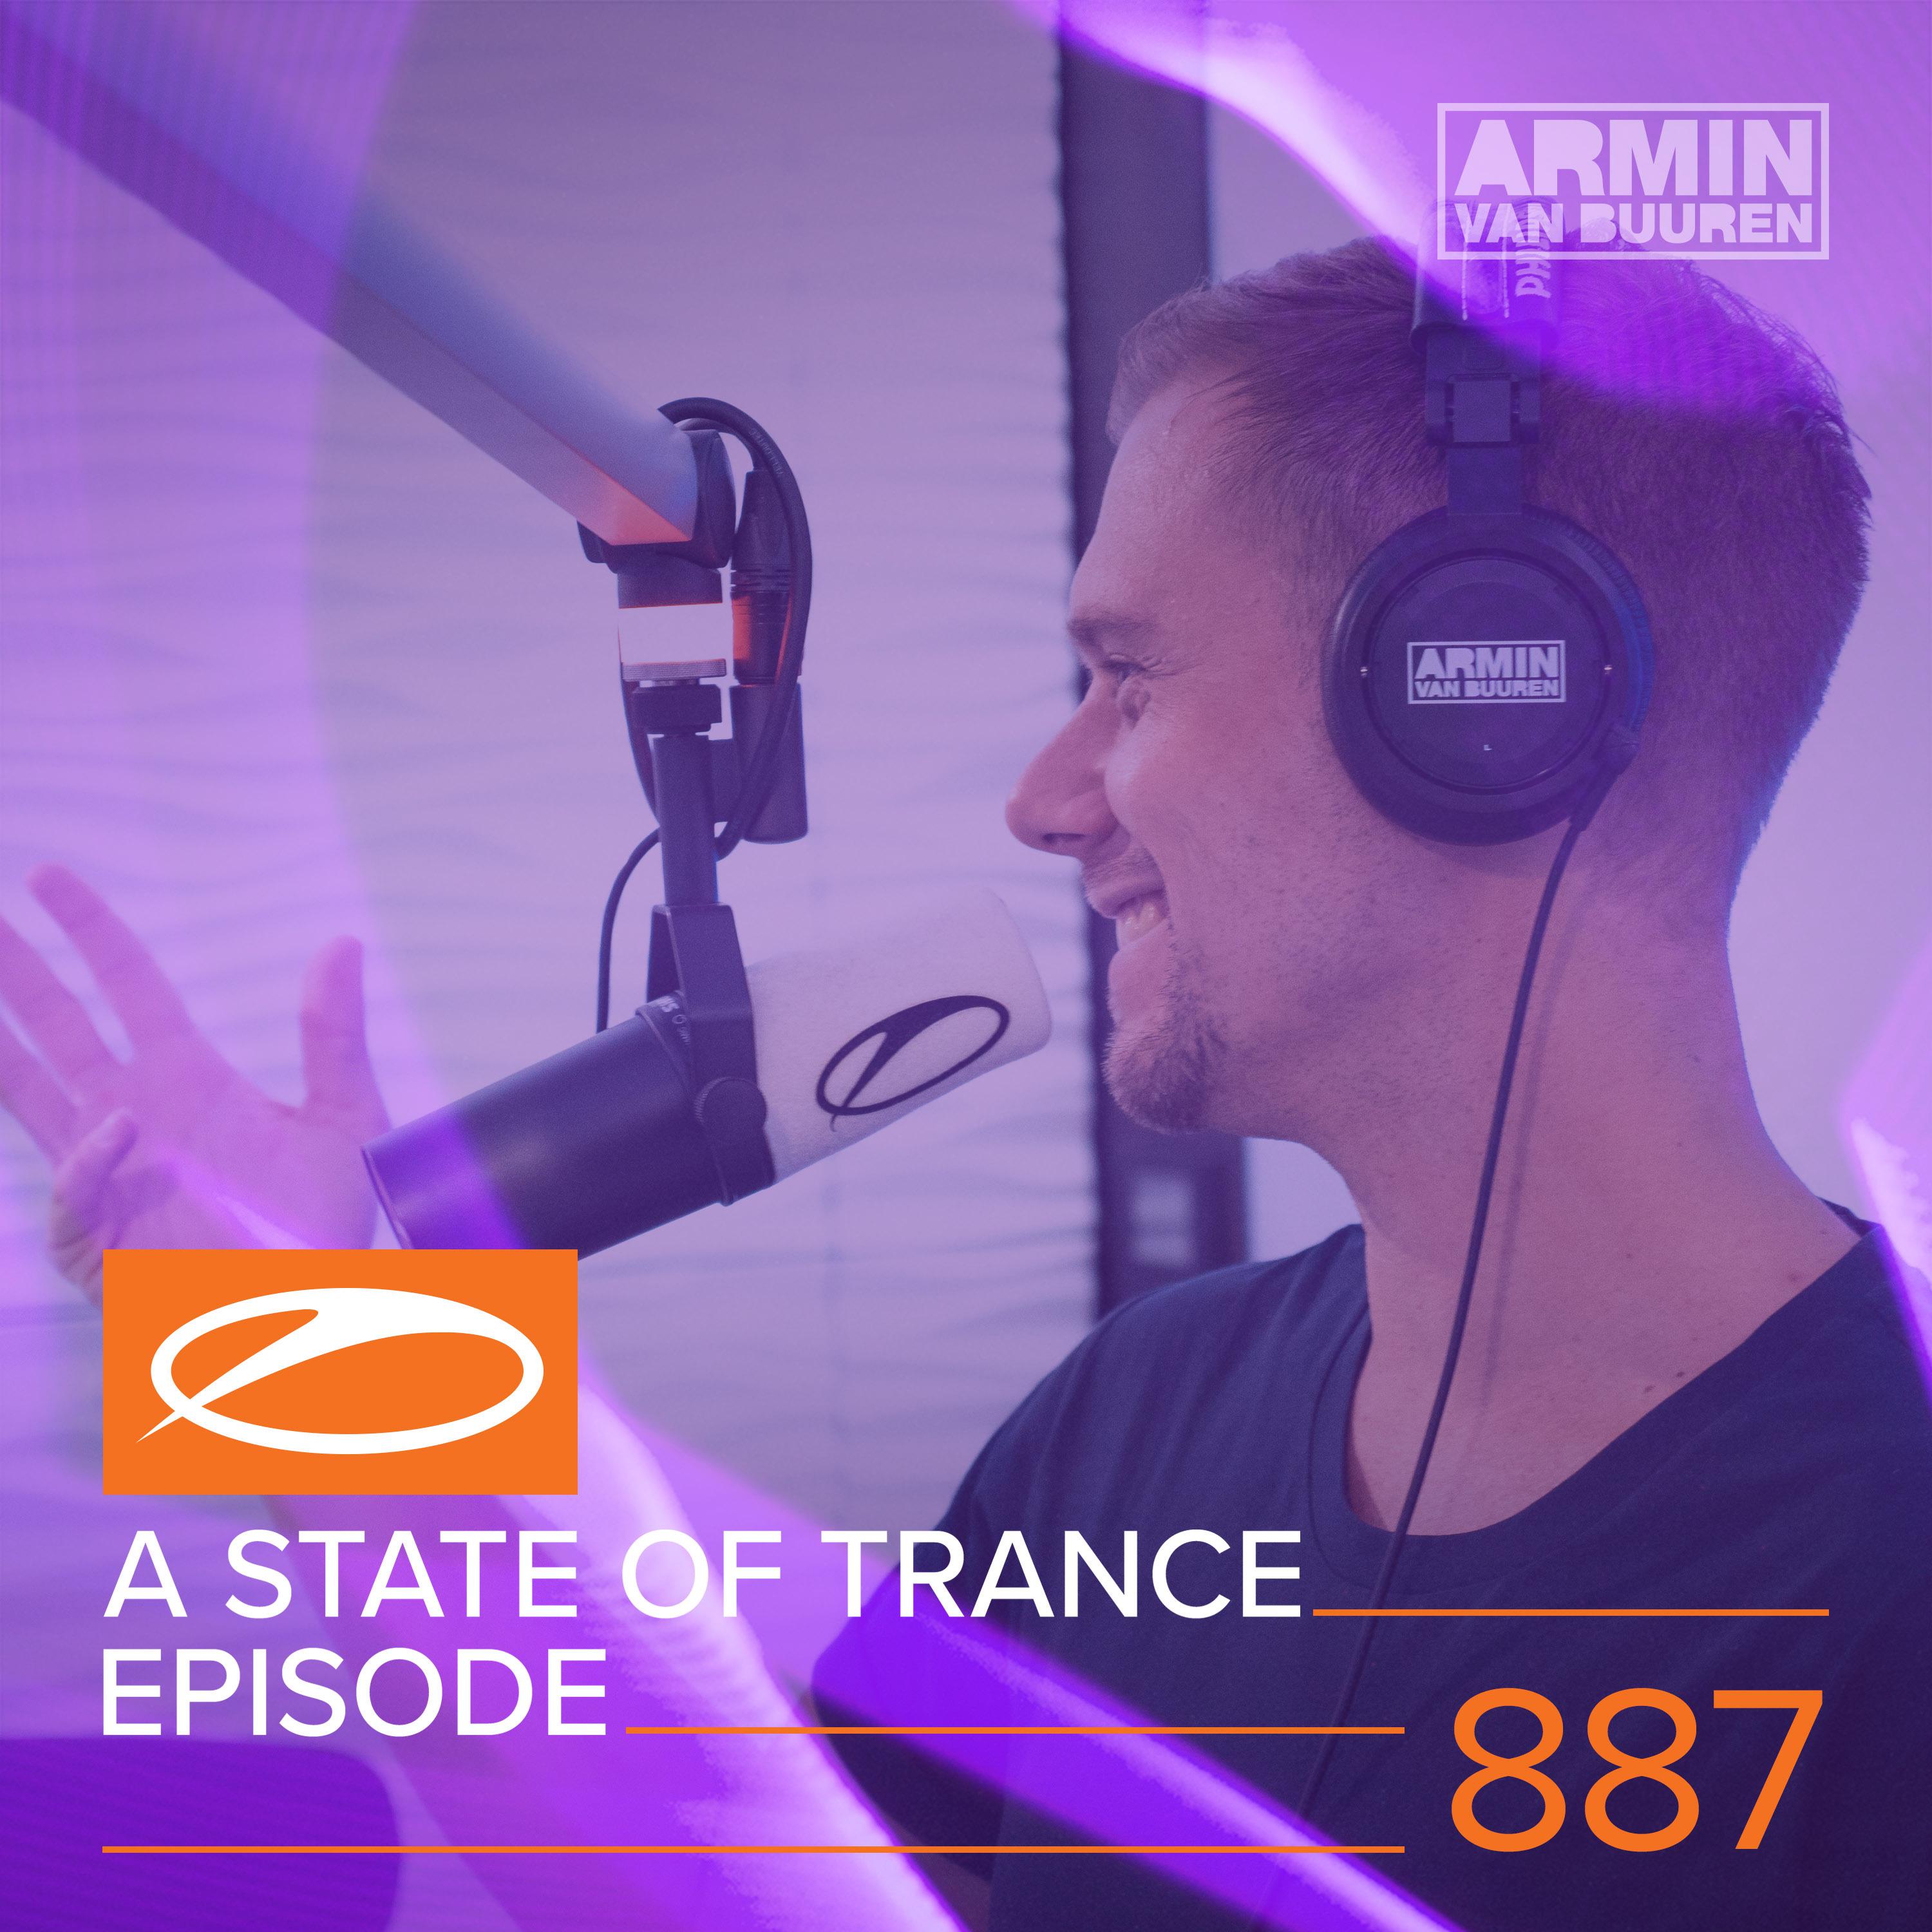 A State Of Trance (ASOT 887) (Shout Outs, Pt. 2)